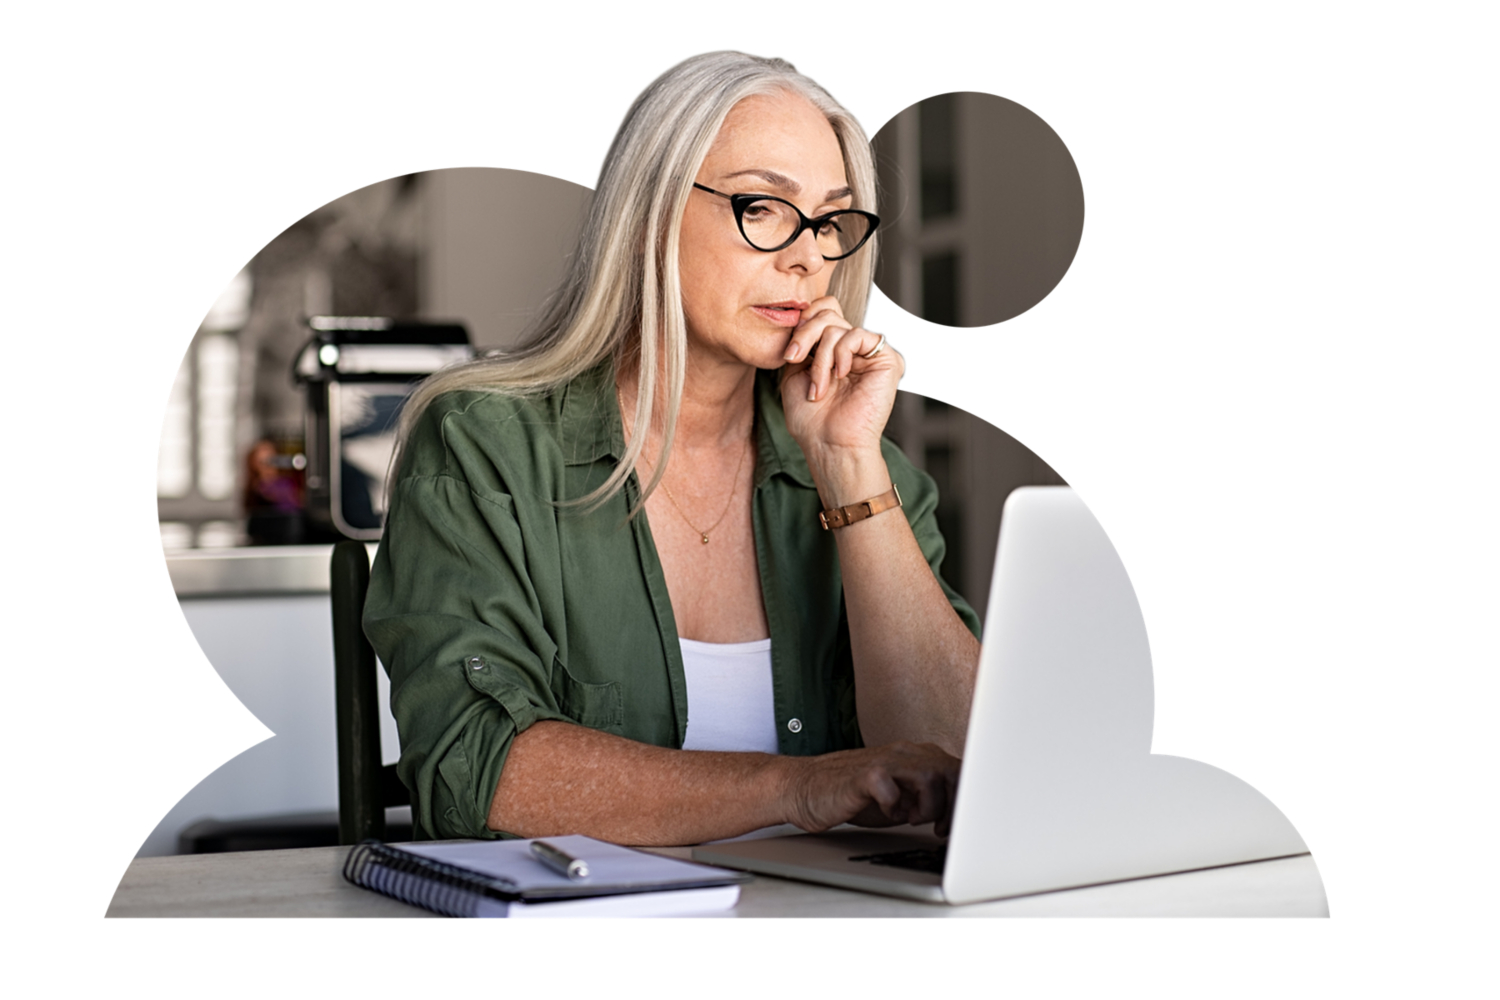 Picture of woman with glasses viewing laptop.